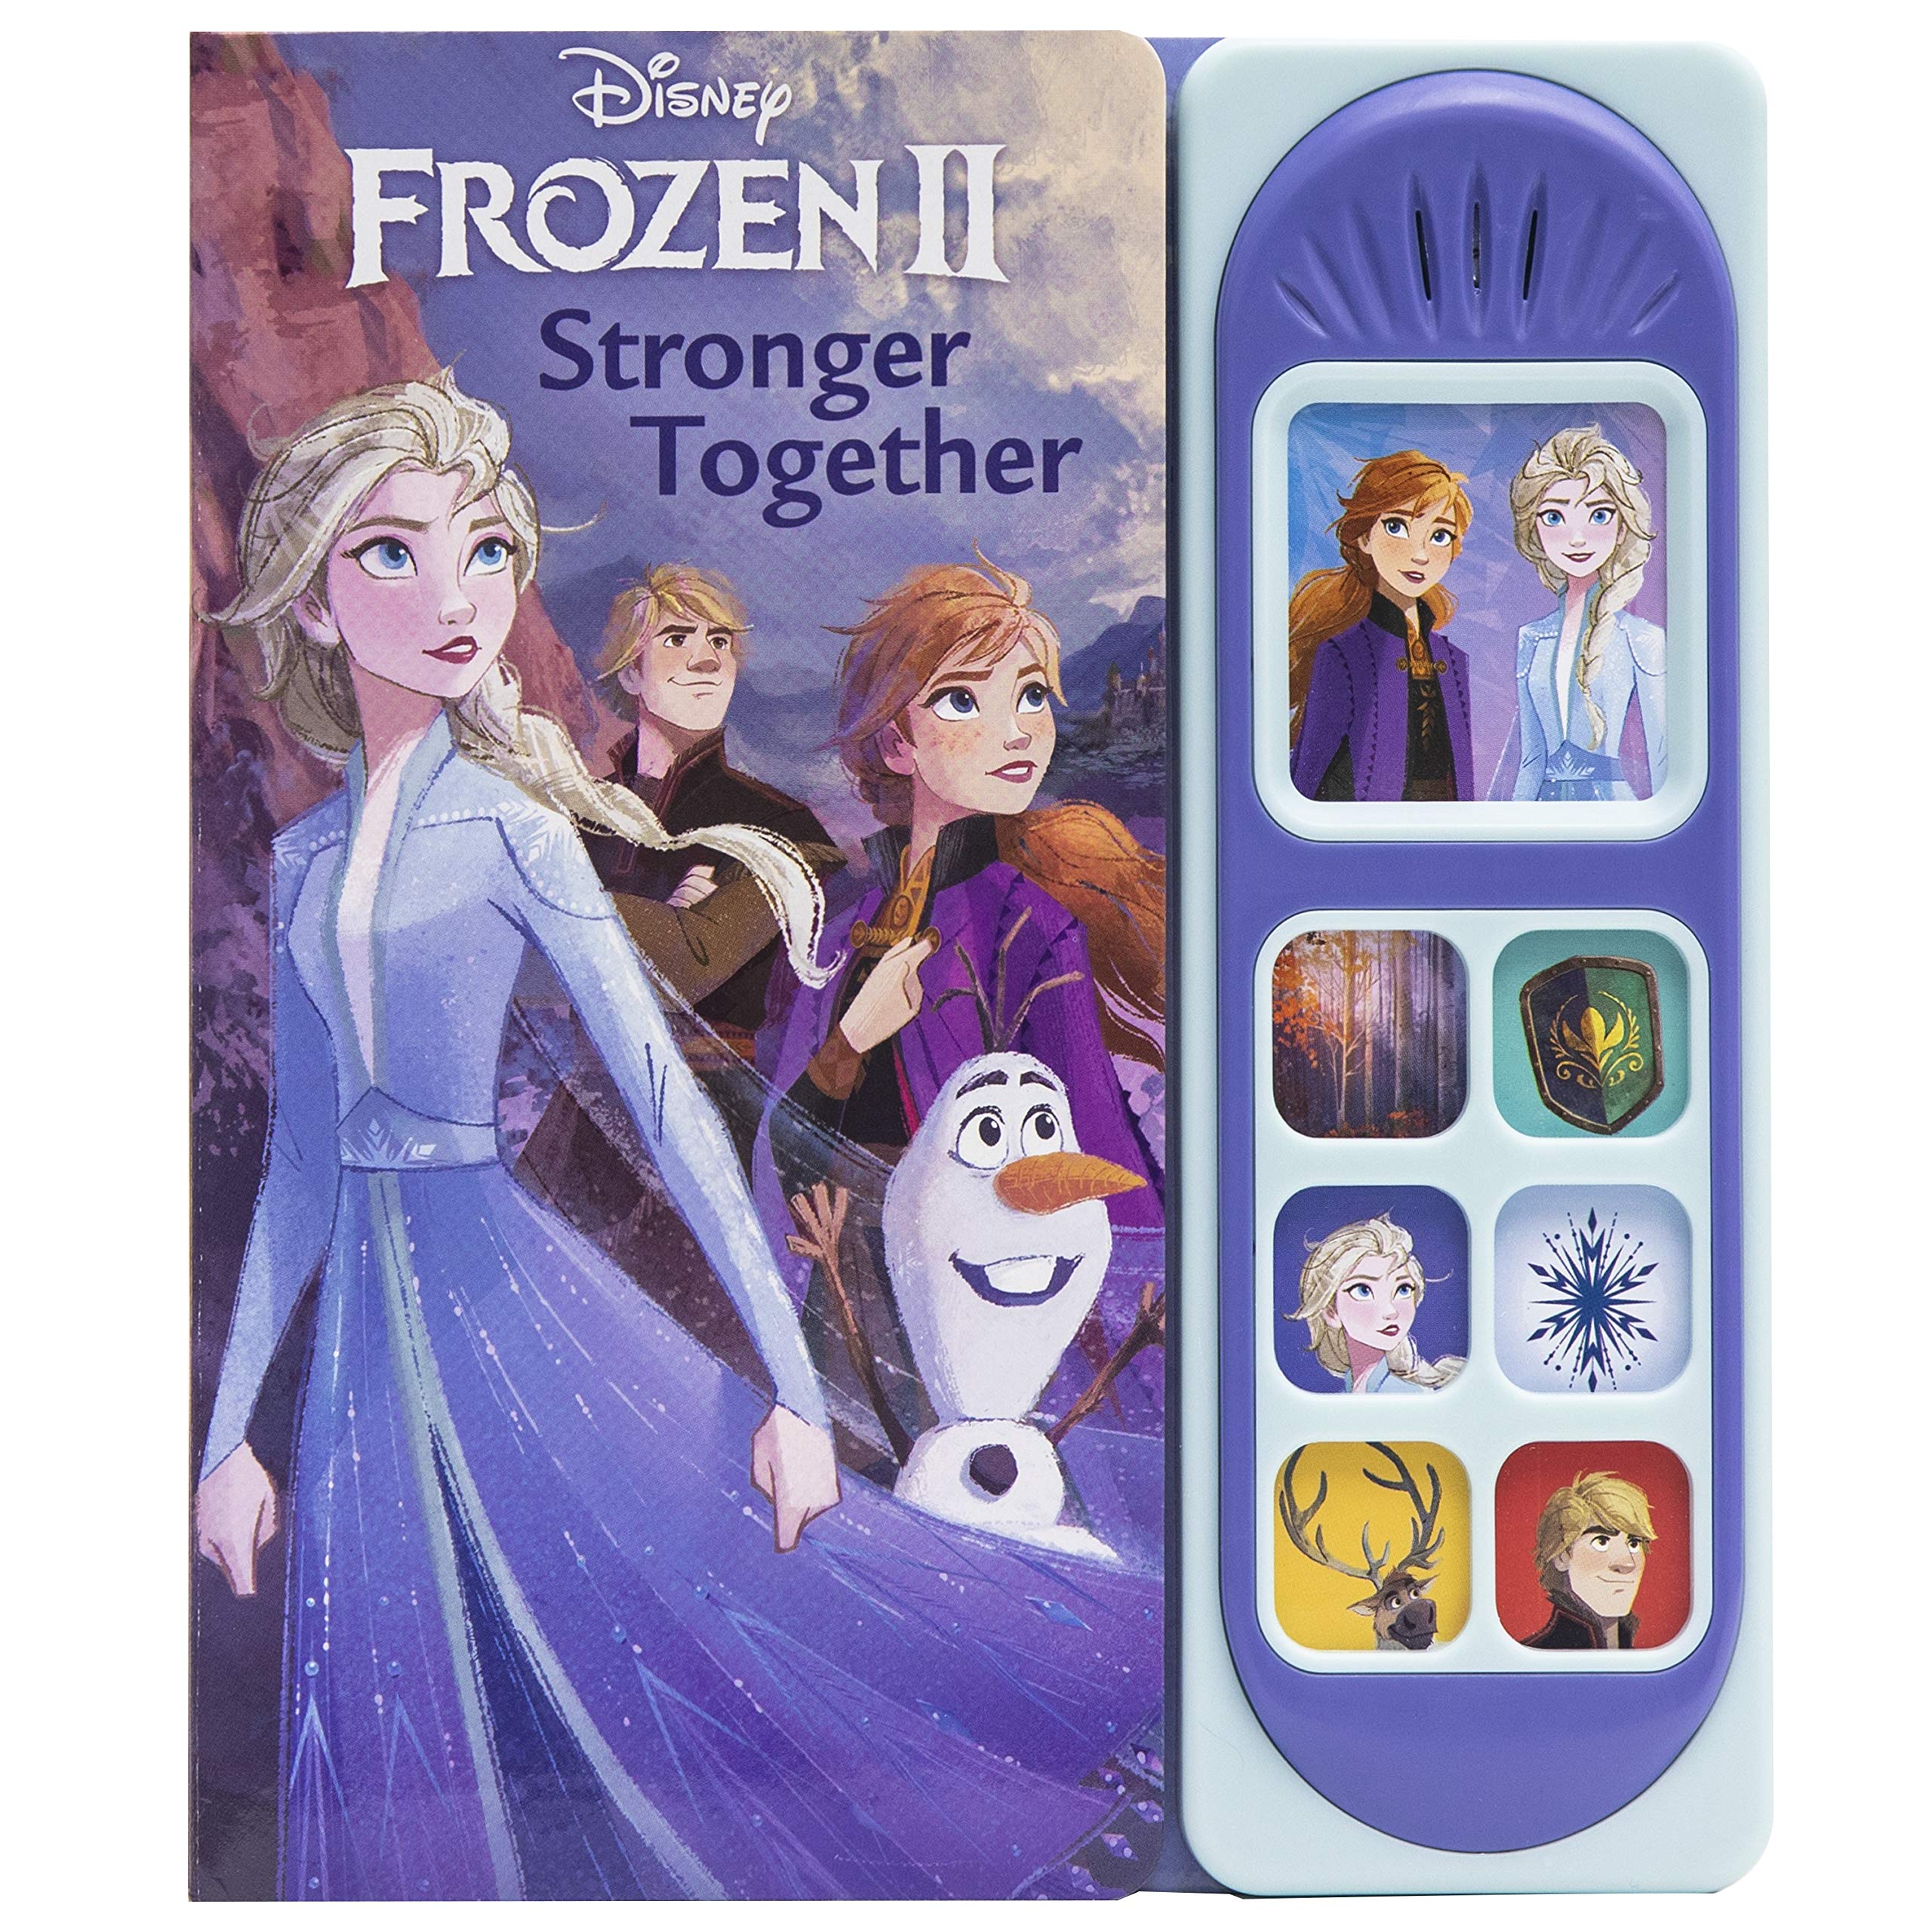 Together　Stronger　Book　Sound　Frozen　Little　book　(Play-A-Sound)　Board